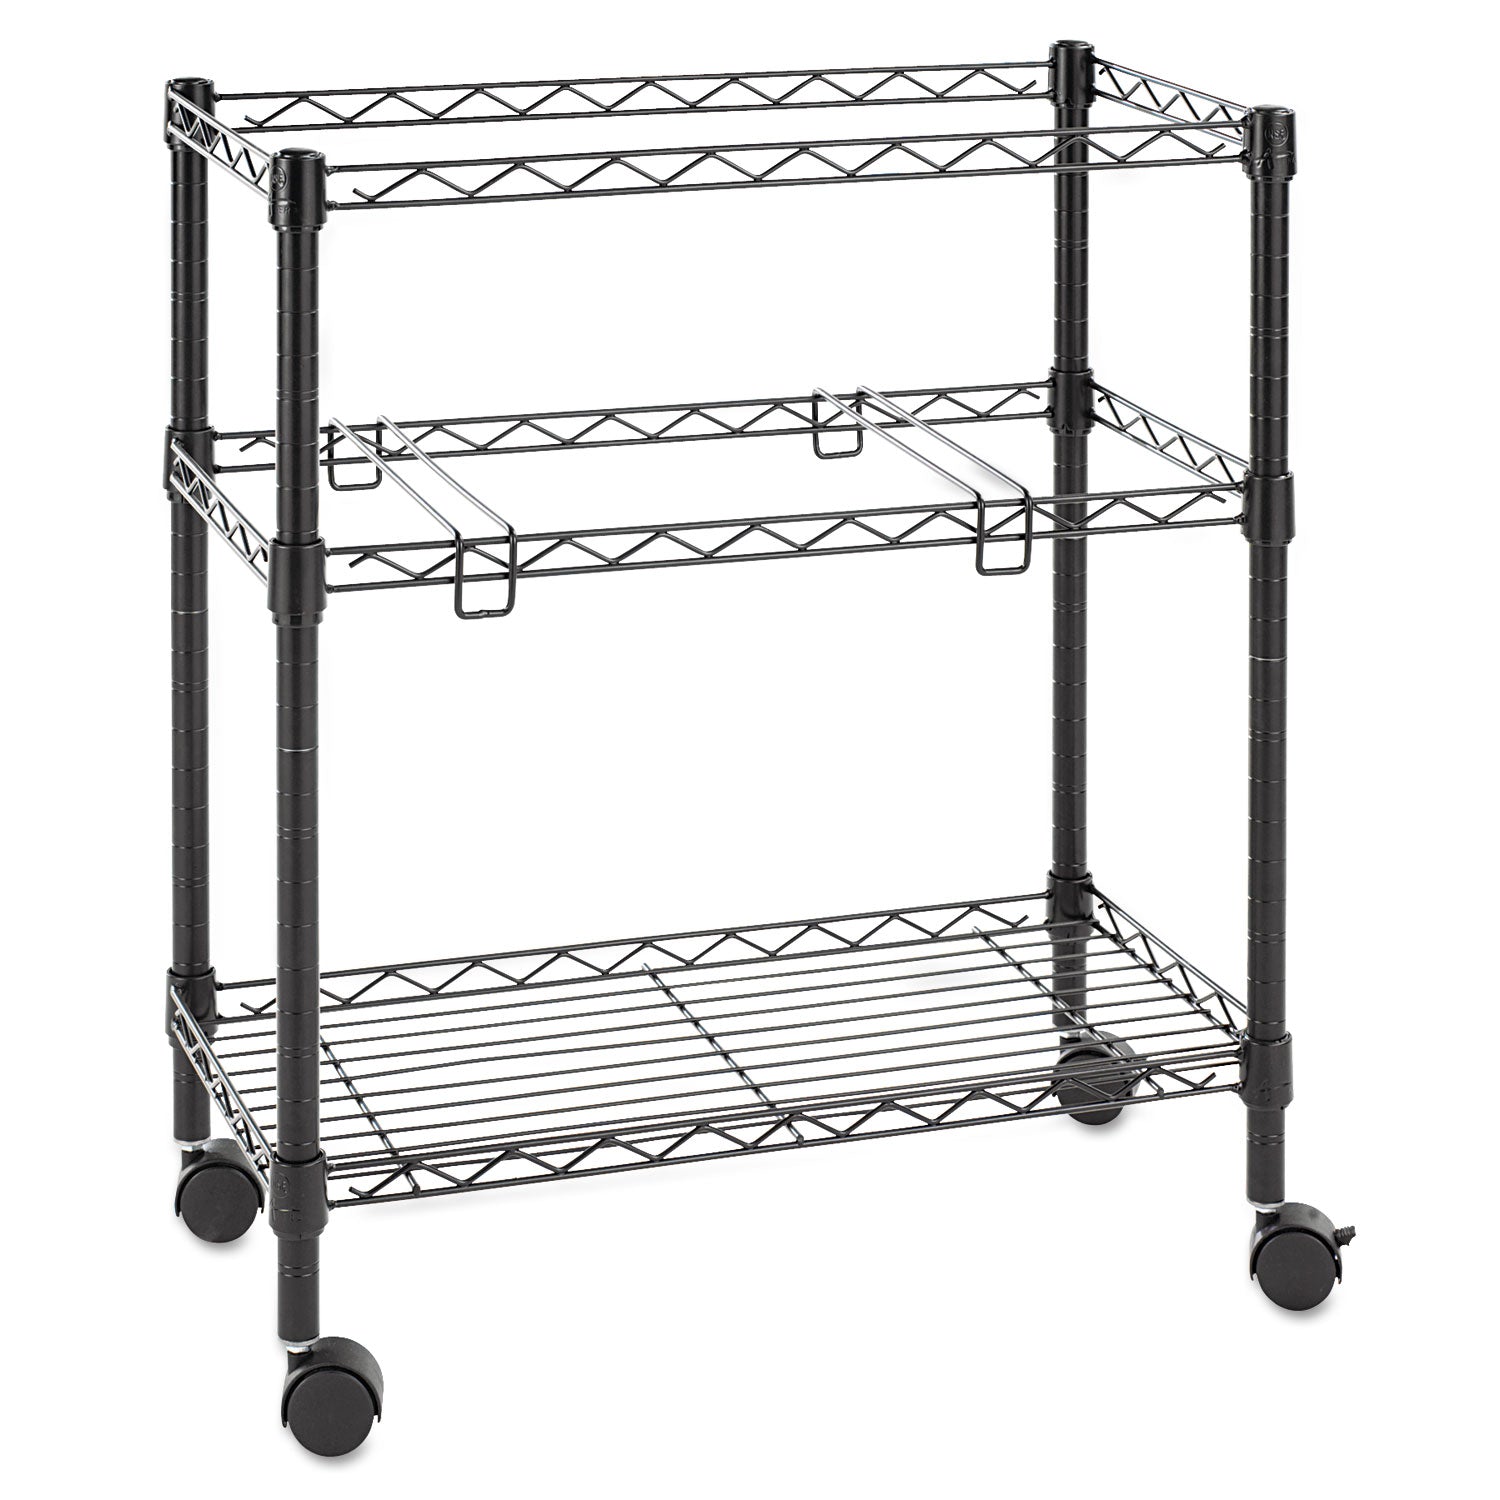 Two-Tier File Cart for Front-to-Back + Side-to-Side Filing, Metal, 1 Shelf, 3 Bins, 26" x 14" x 29.5", Black - 